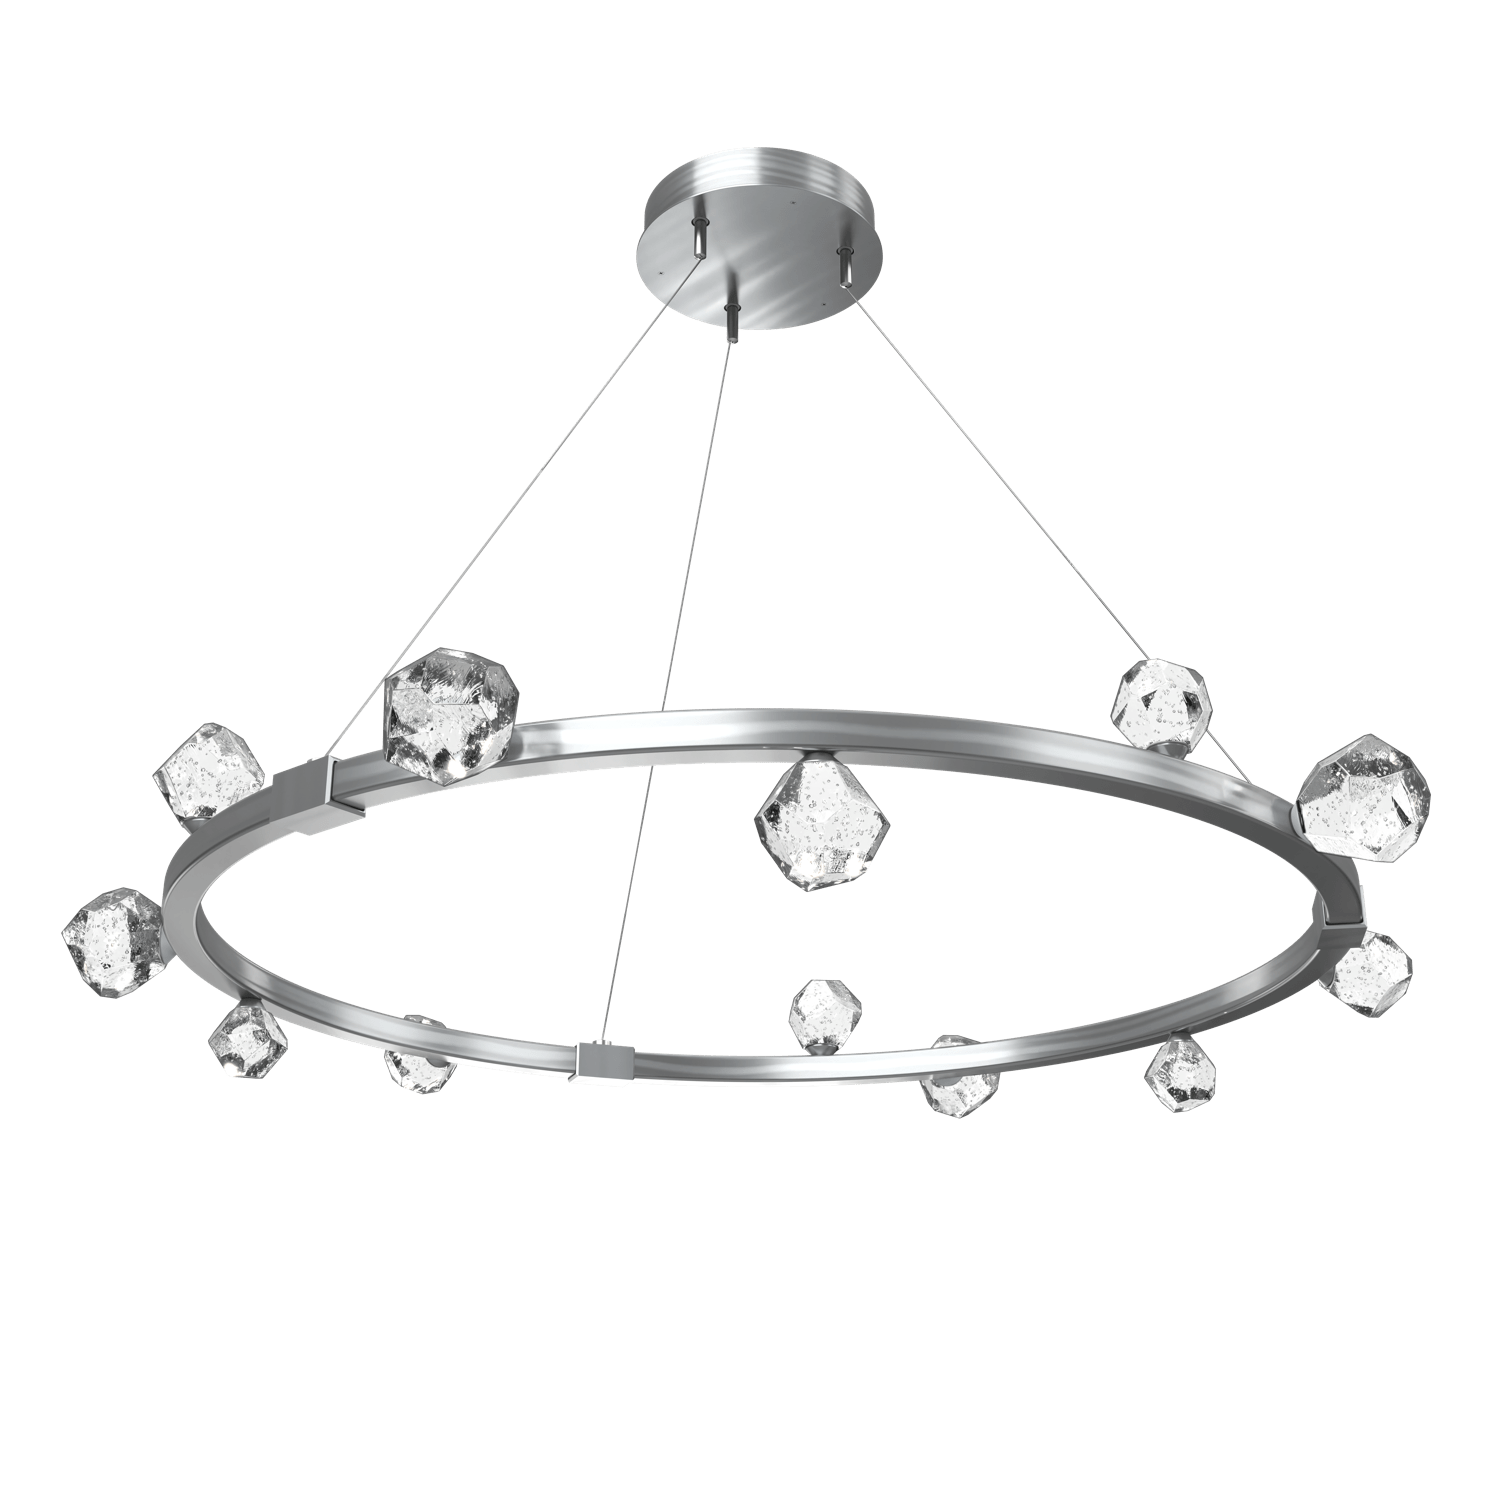 CHB0070-40-SN-Hammerton-Studio-Stella-40-inch-radial-ring-chandelier-with-satin-nickel-finish-and-clear-cast-glass-shades-and-LED-lamping